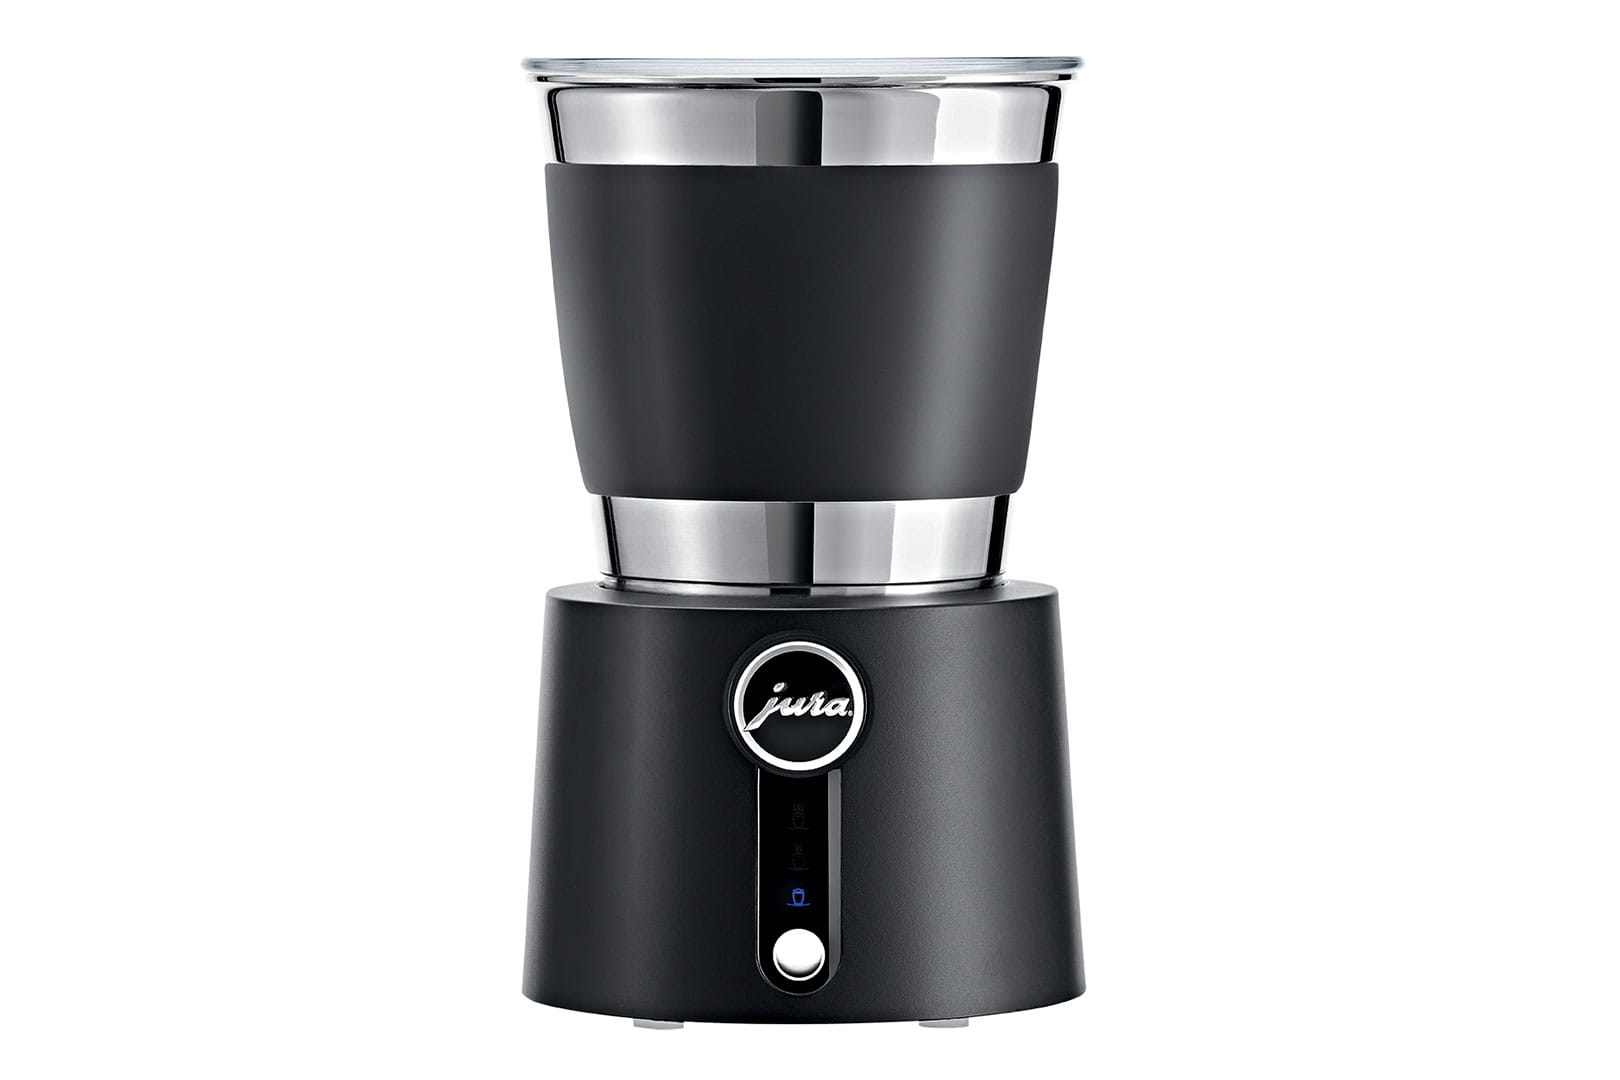 https://hk.jura.com/-/media/global/images/home-products/milk-frother/image-gallery-milk-frother-hot-and-cold/milkfrother1.jpg